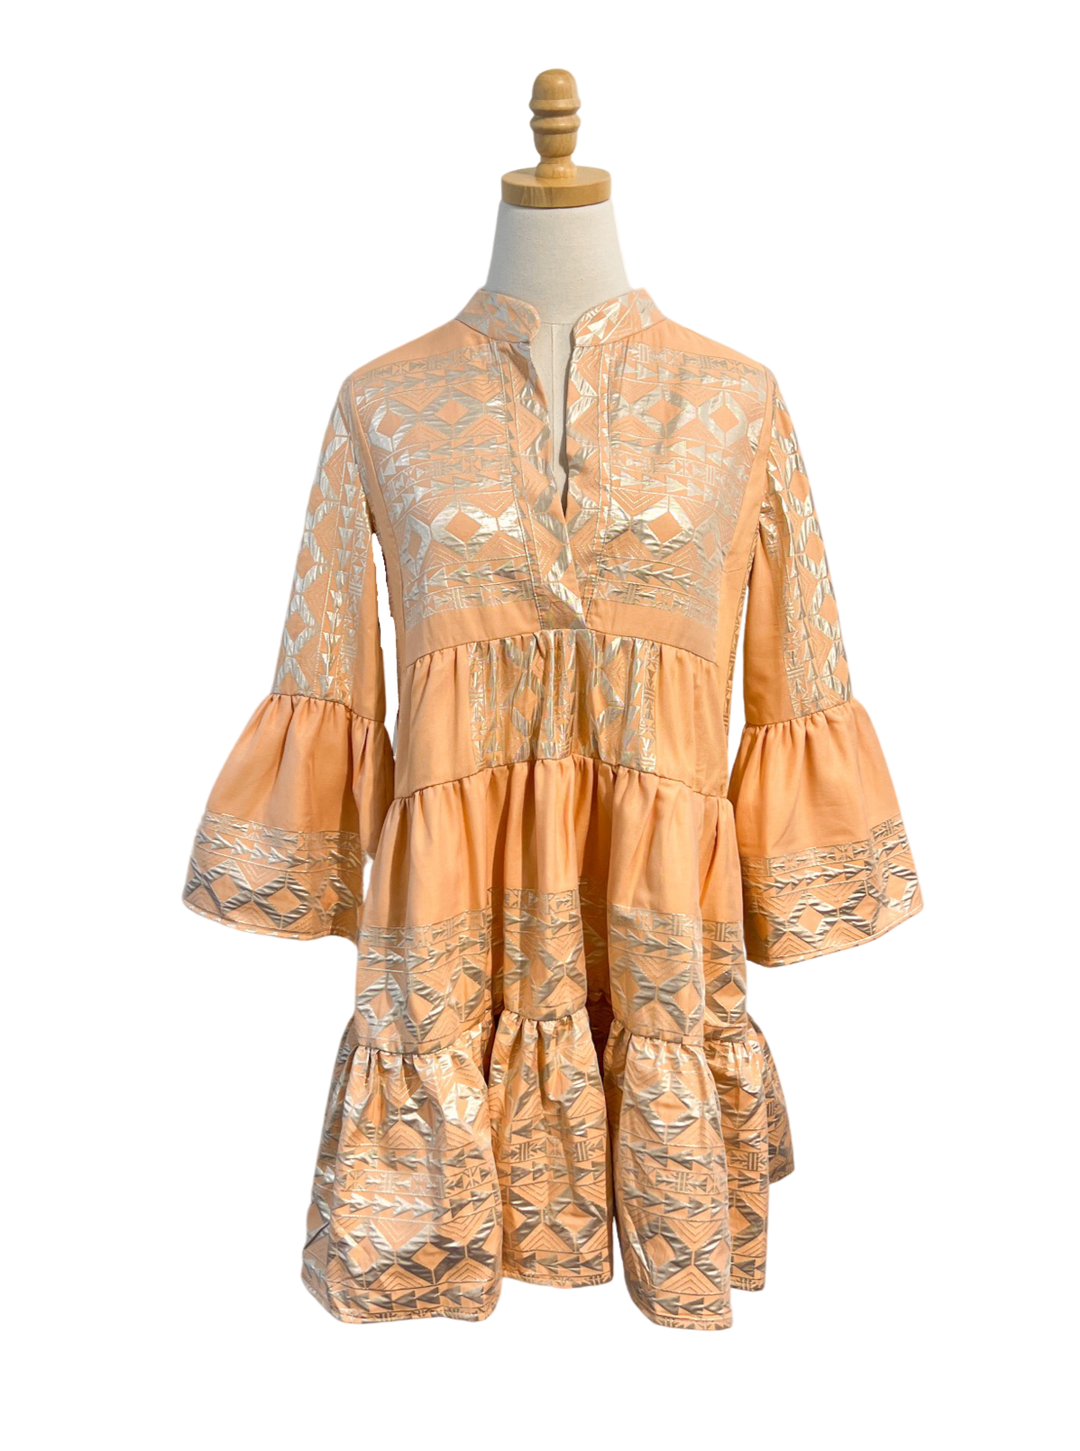 Lace Apparel Lace | Peach Tiered Jacquard Bell Sleeve Mini Dress